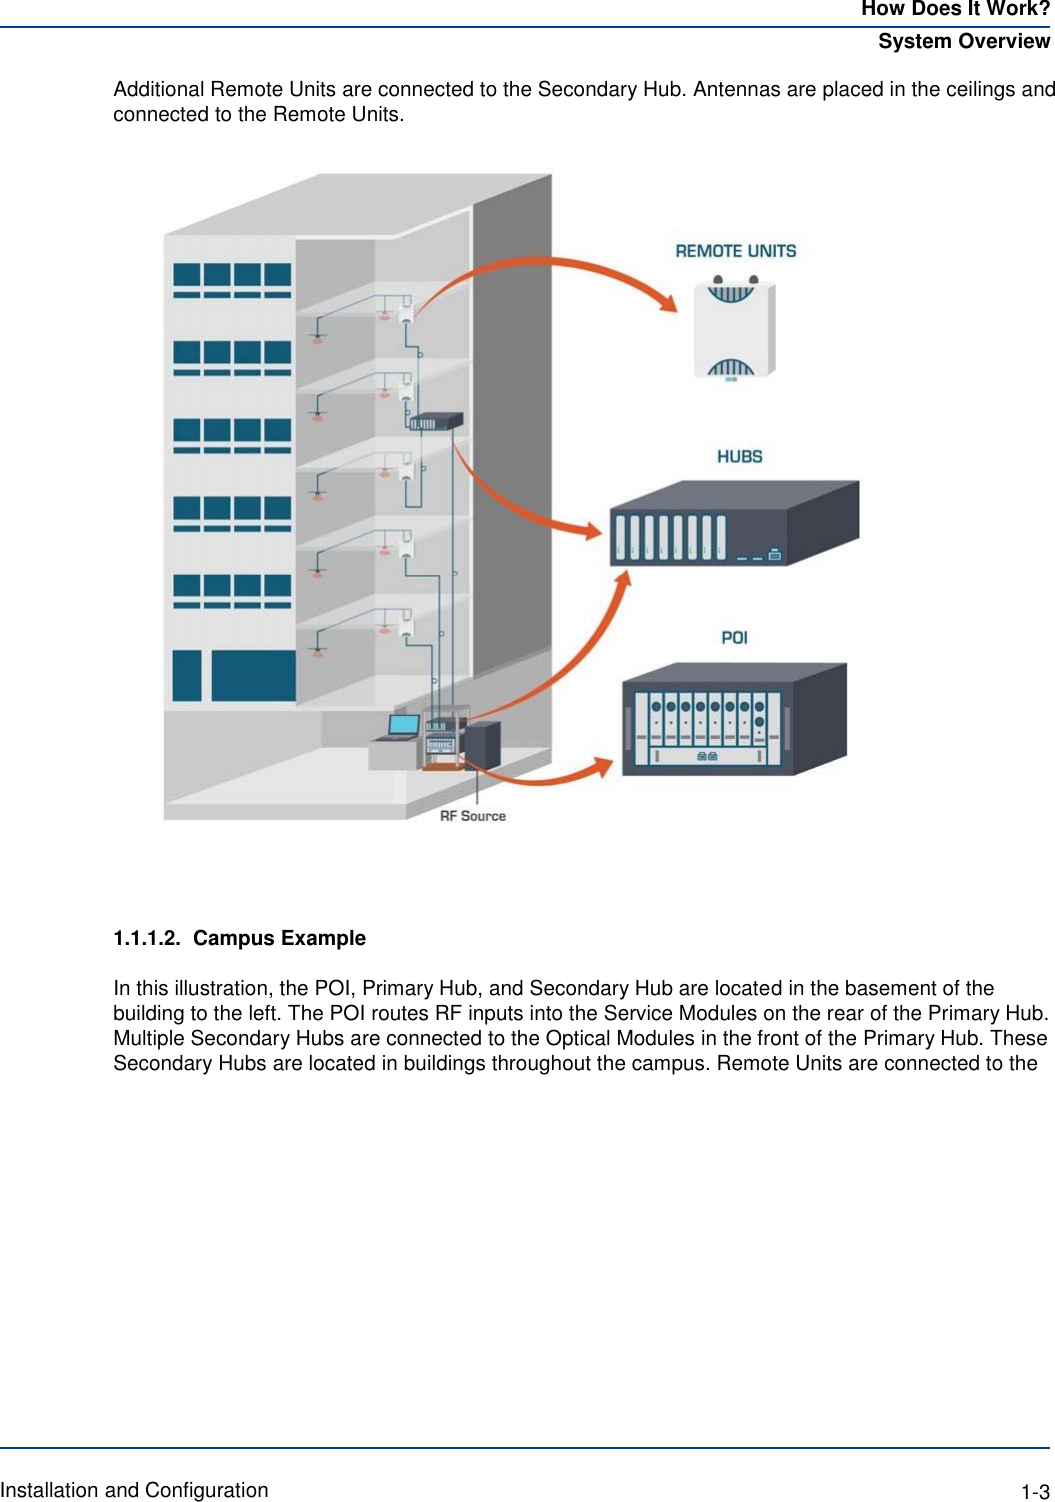 How Does It Work? System Overview Additional Remote Units are connected to the Secondary Hub. Antennas are placed in the ceilings and connected to the Remote Units.       1.1.1.2. Campus Example  In this illustration, the POI, Primary Hub, and Secondary Hub are located in the basement of the building to the left. The POI routes RF inputs into the Service Modules on the rear of the Primary Hub. Multiple Secondary Hubs are connected to the Optical Modules in the front of the Primary Hub. These Secondary Hubs are located in buildings throughout the campus. Remote Units are connected to the                 Installation and Configuration  1-3 